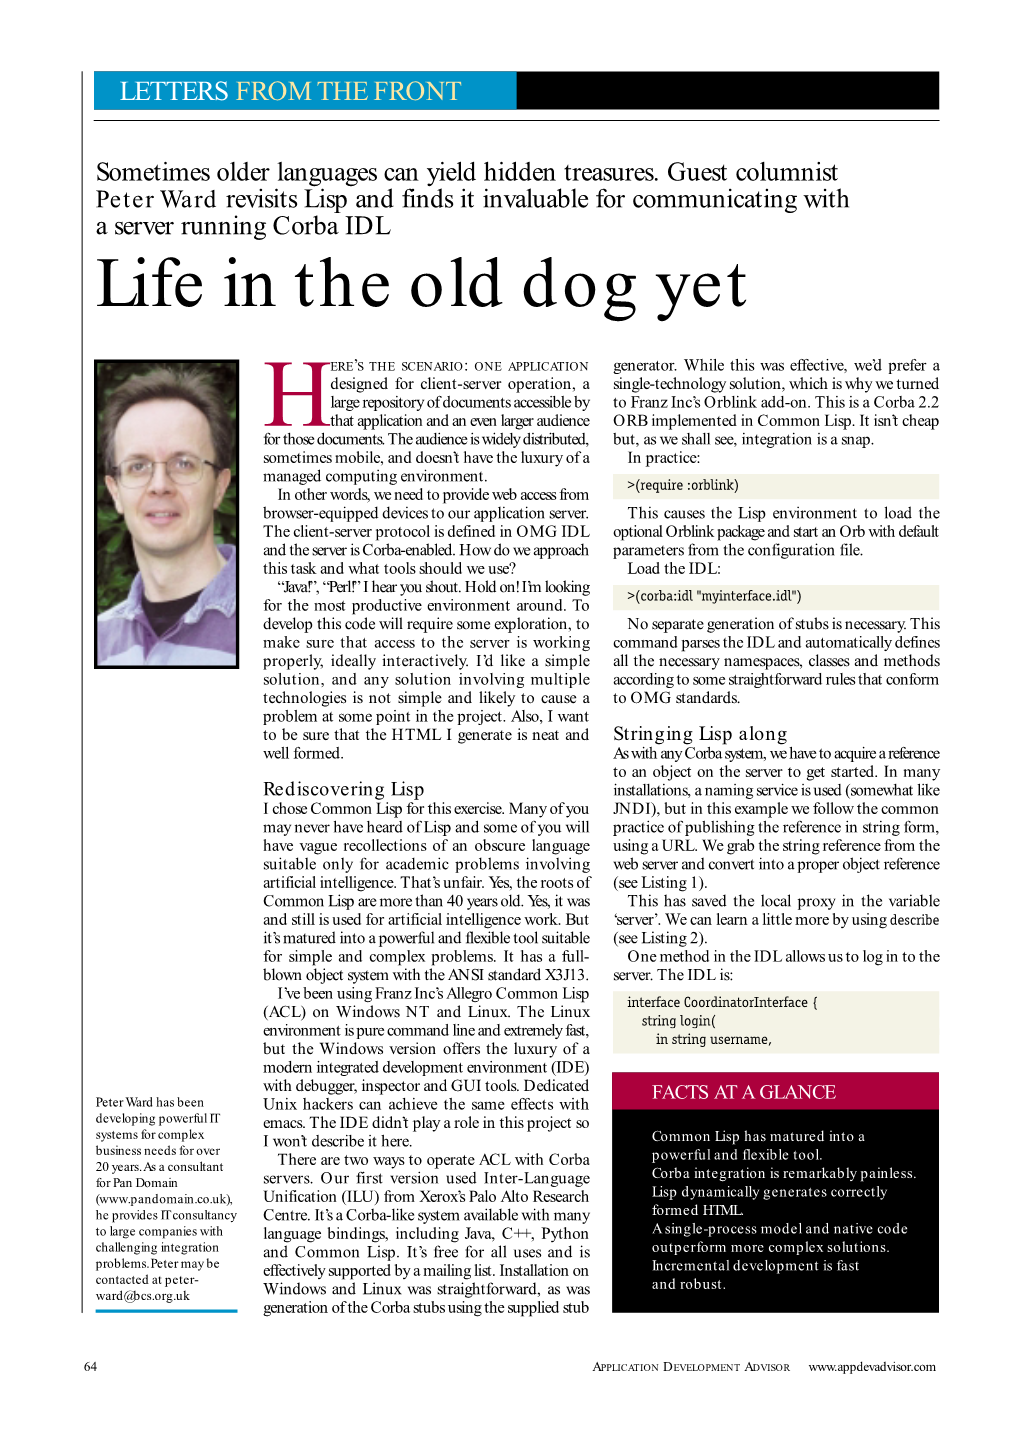 Life in the Old Dog Yet